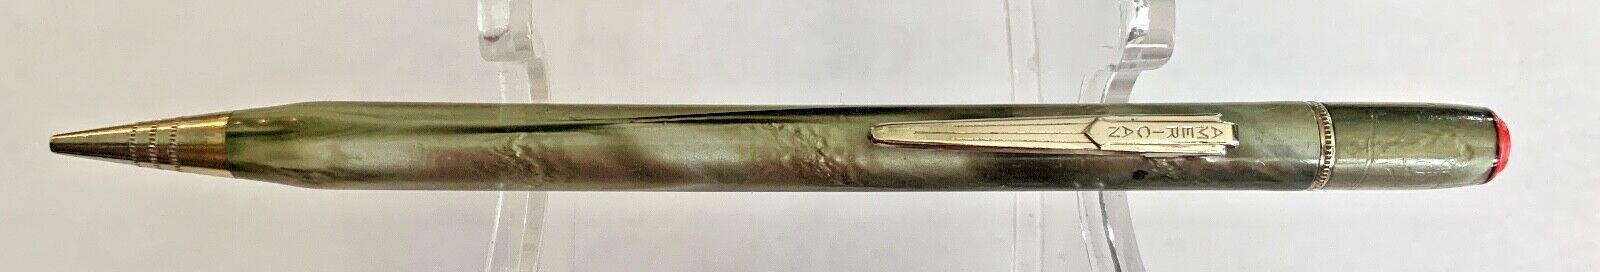 VINTAGE AMERICAN MECHANICAL PENCIL, GREEN MARBLED & CHROME TRIM, 1950\'S, 0.9MM